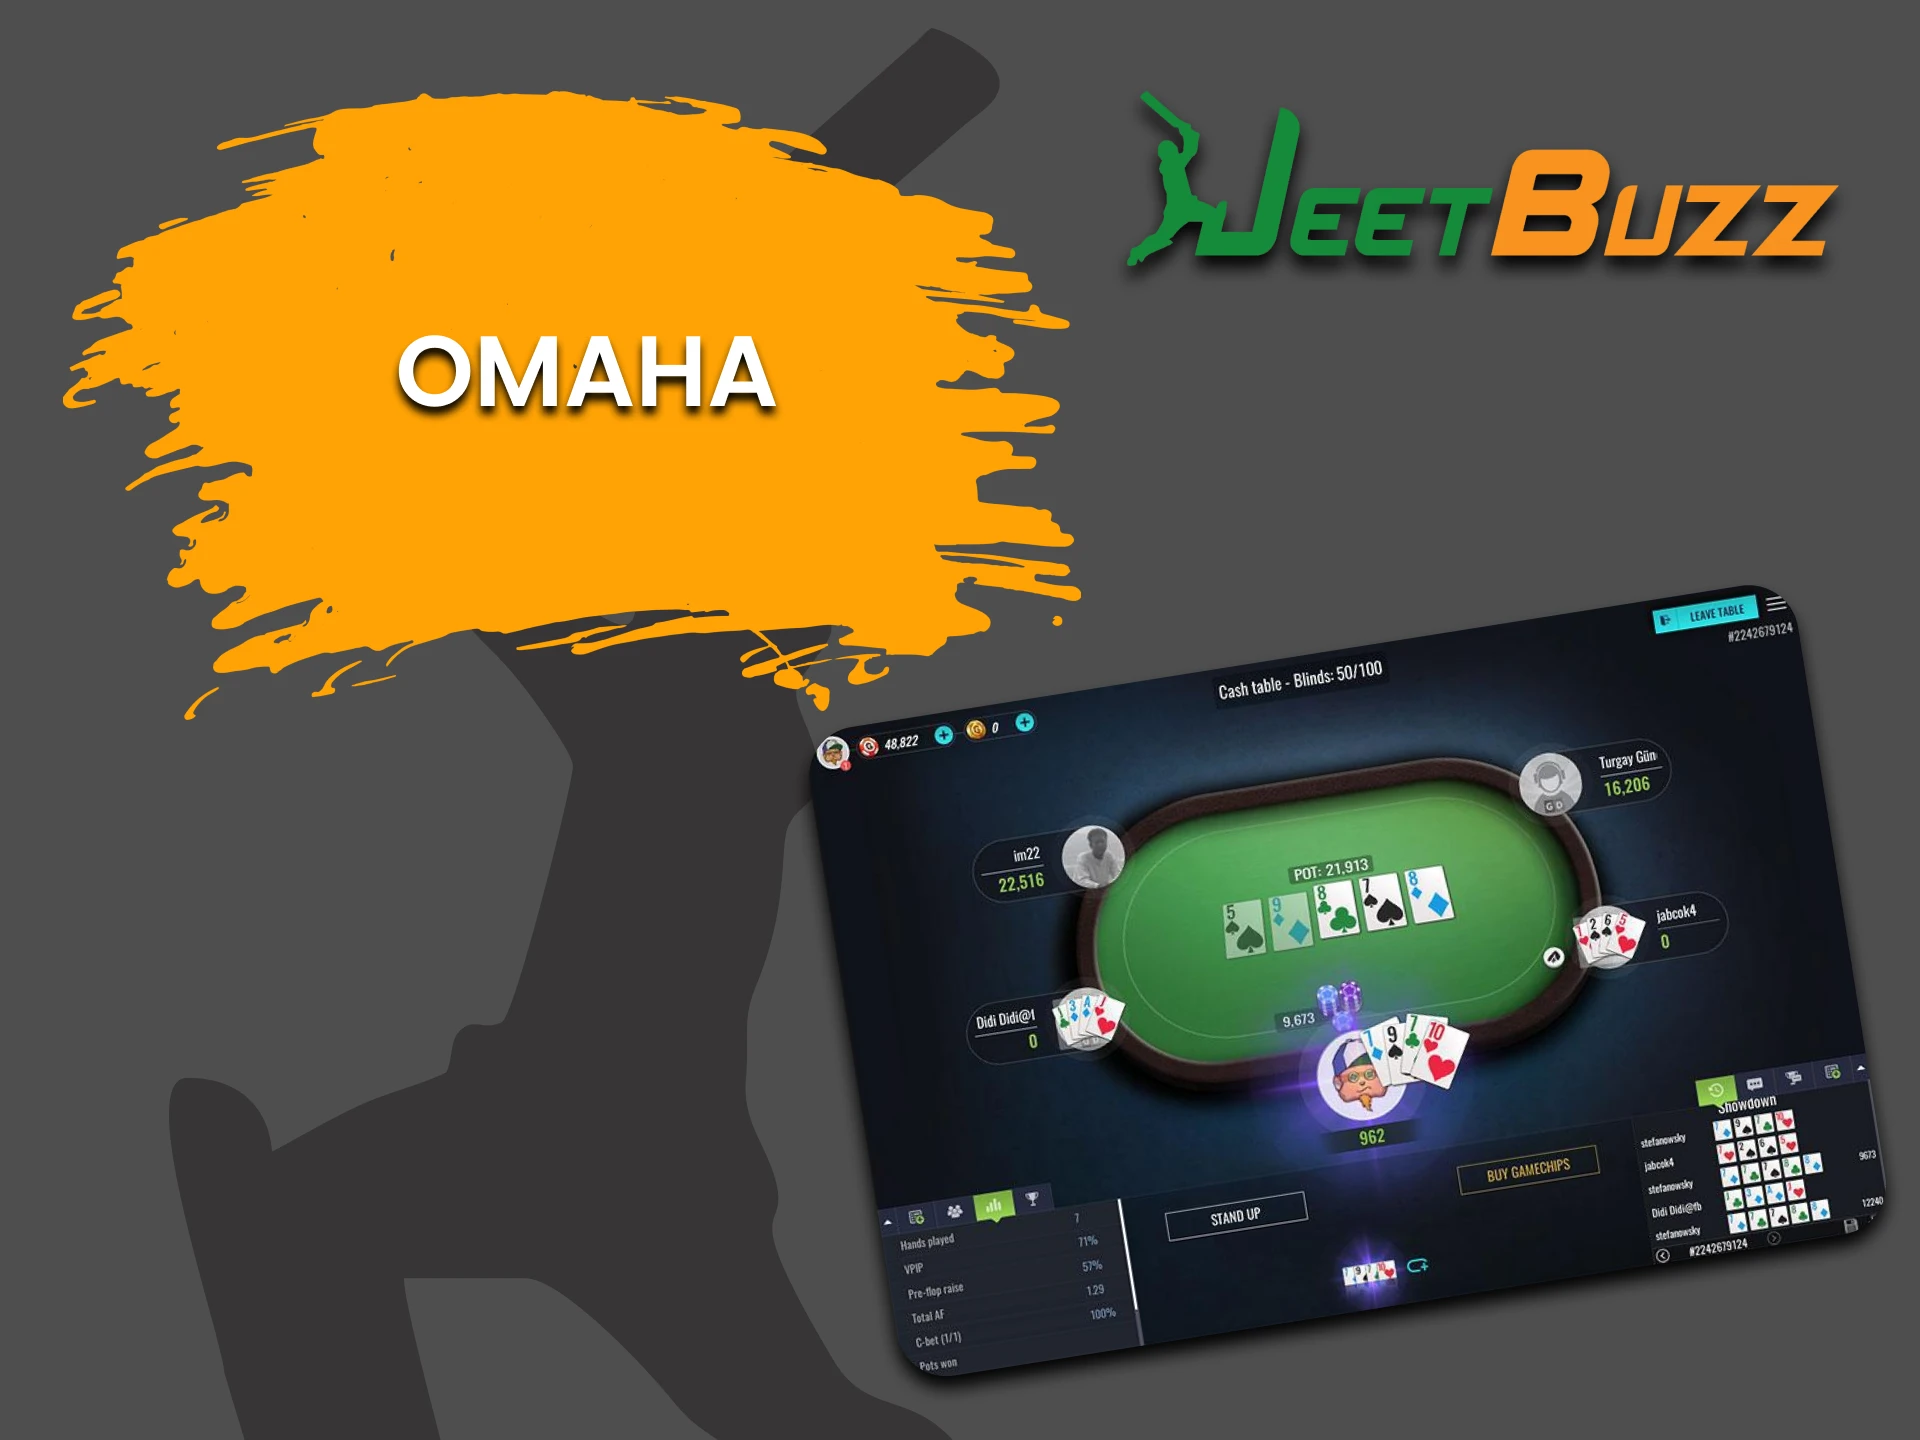 To play Poker on JeetBuzz, choose Omaha.